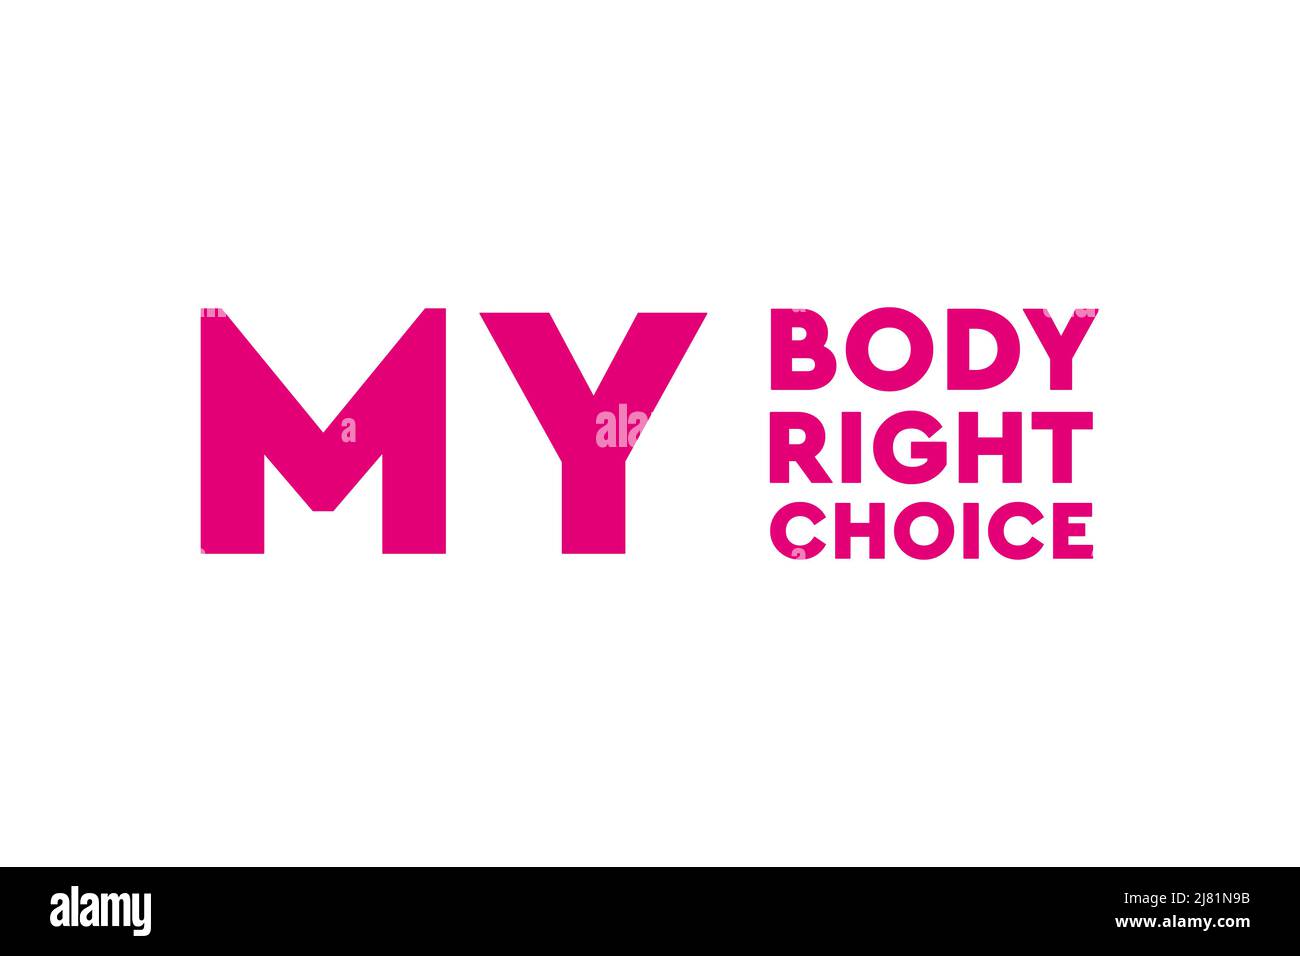 Keep abortion legal. My body, my right, my choice. Pro abortion poster, banner or background Stock Photo